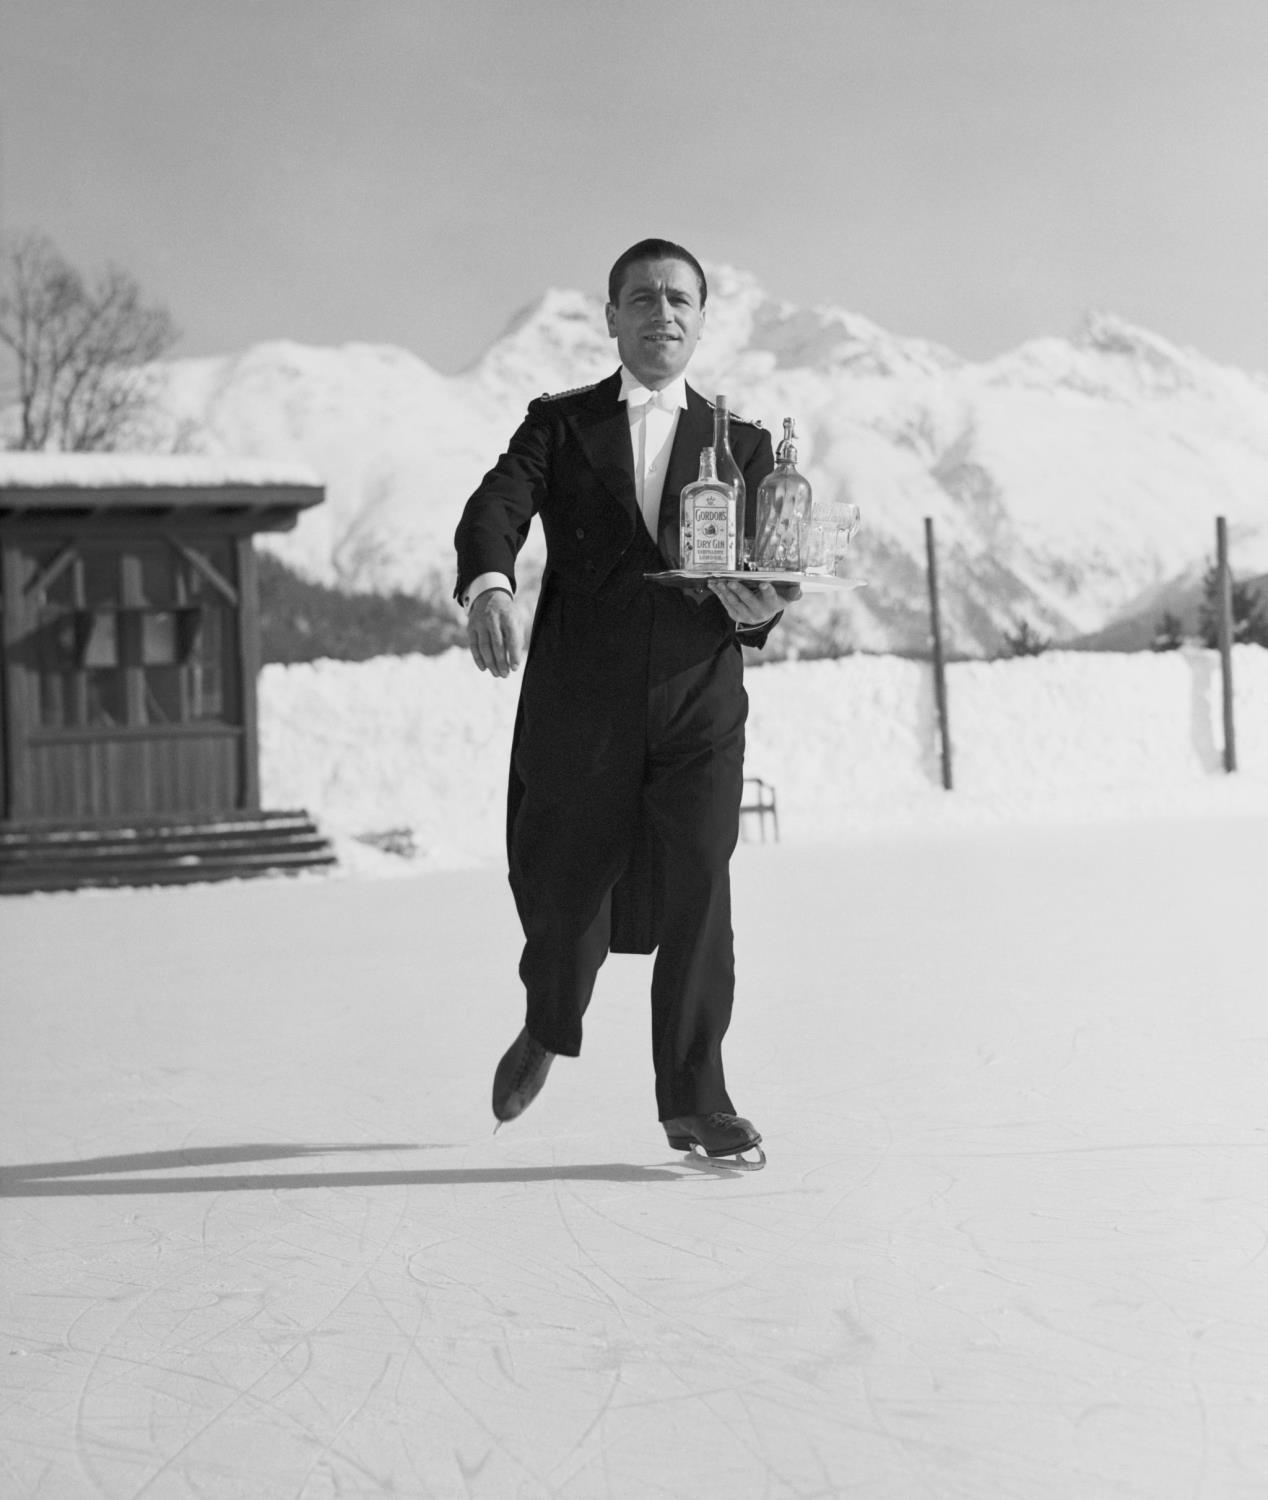 Getty. Skating Waiter 50x60cm ( Indre mål) By Horace Abrahams